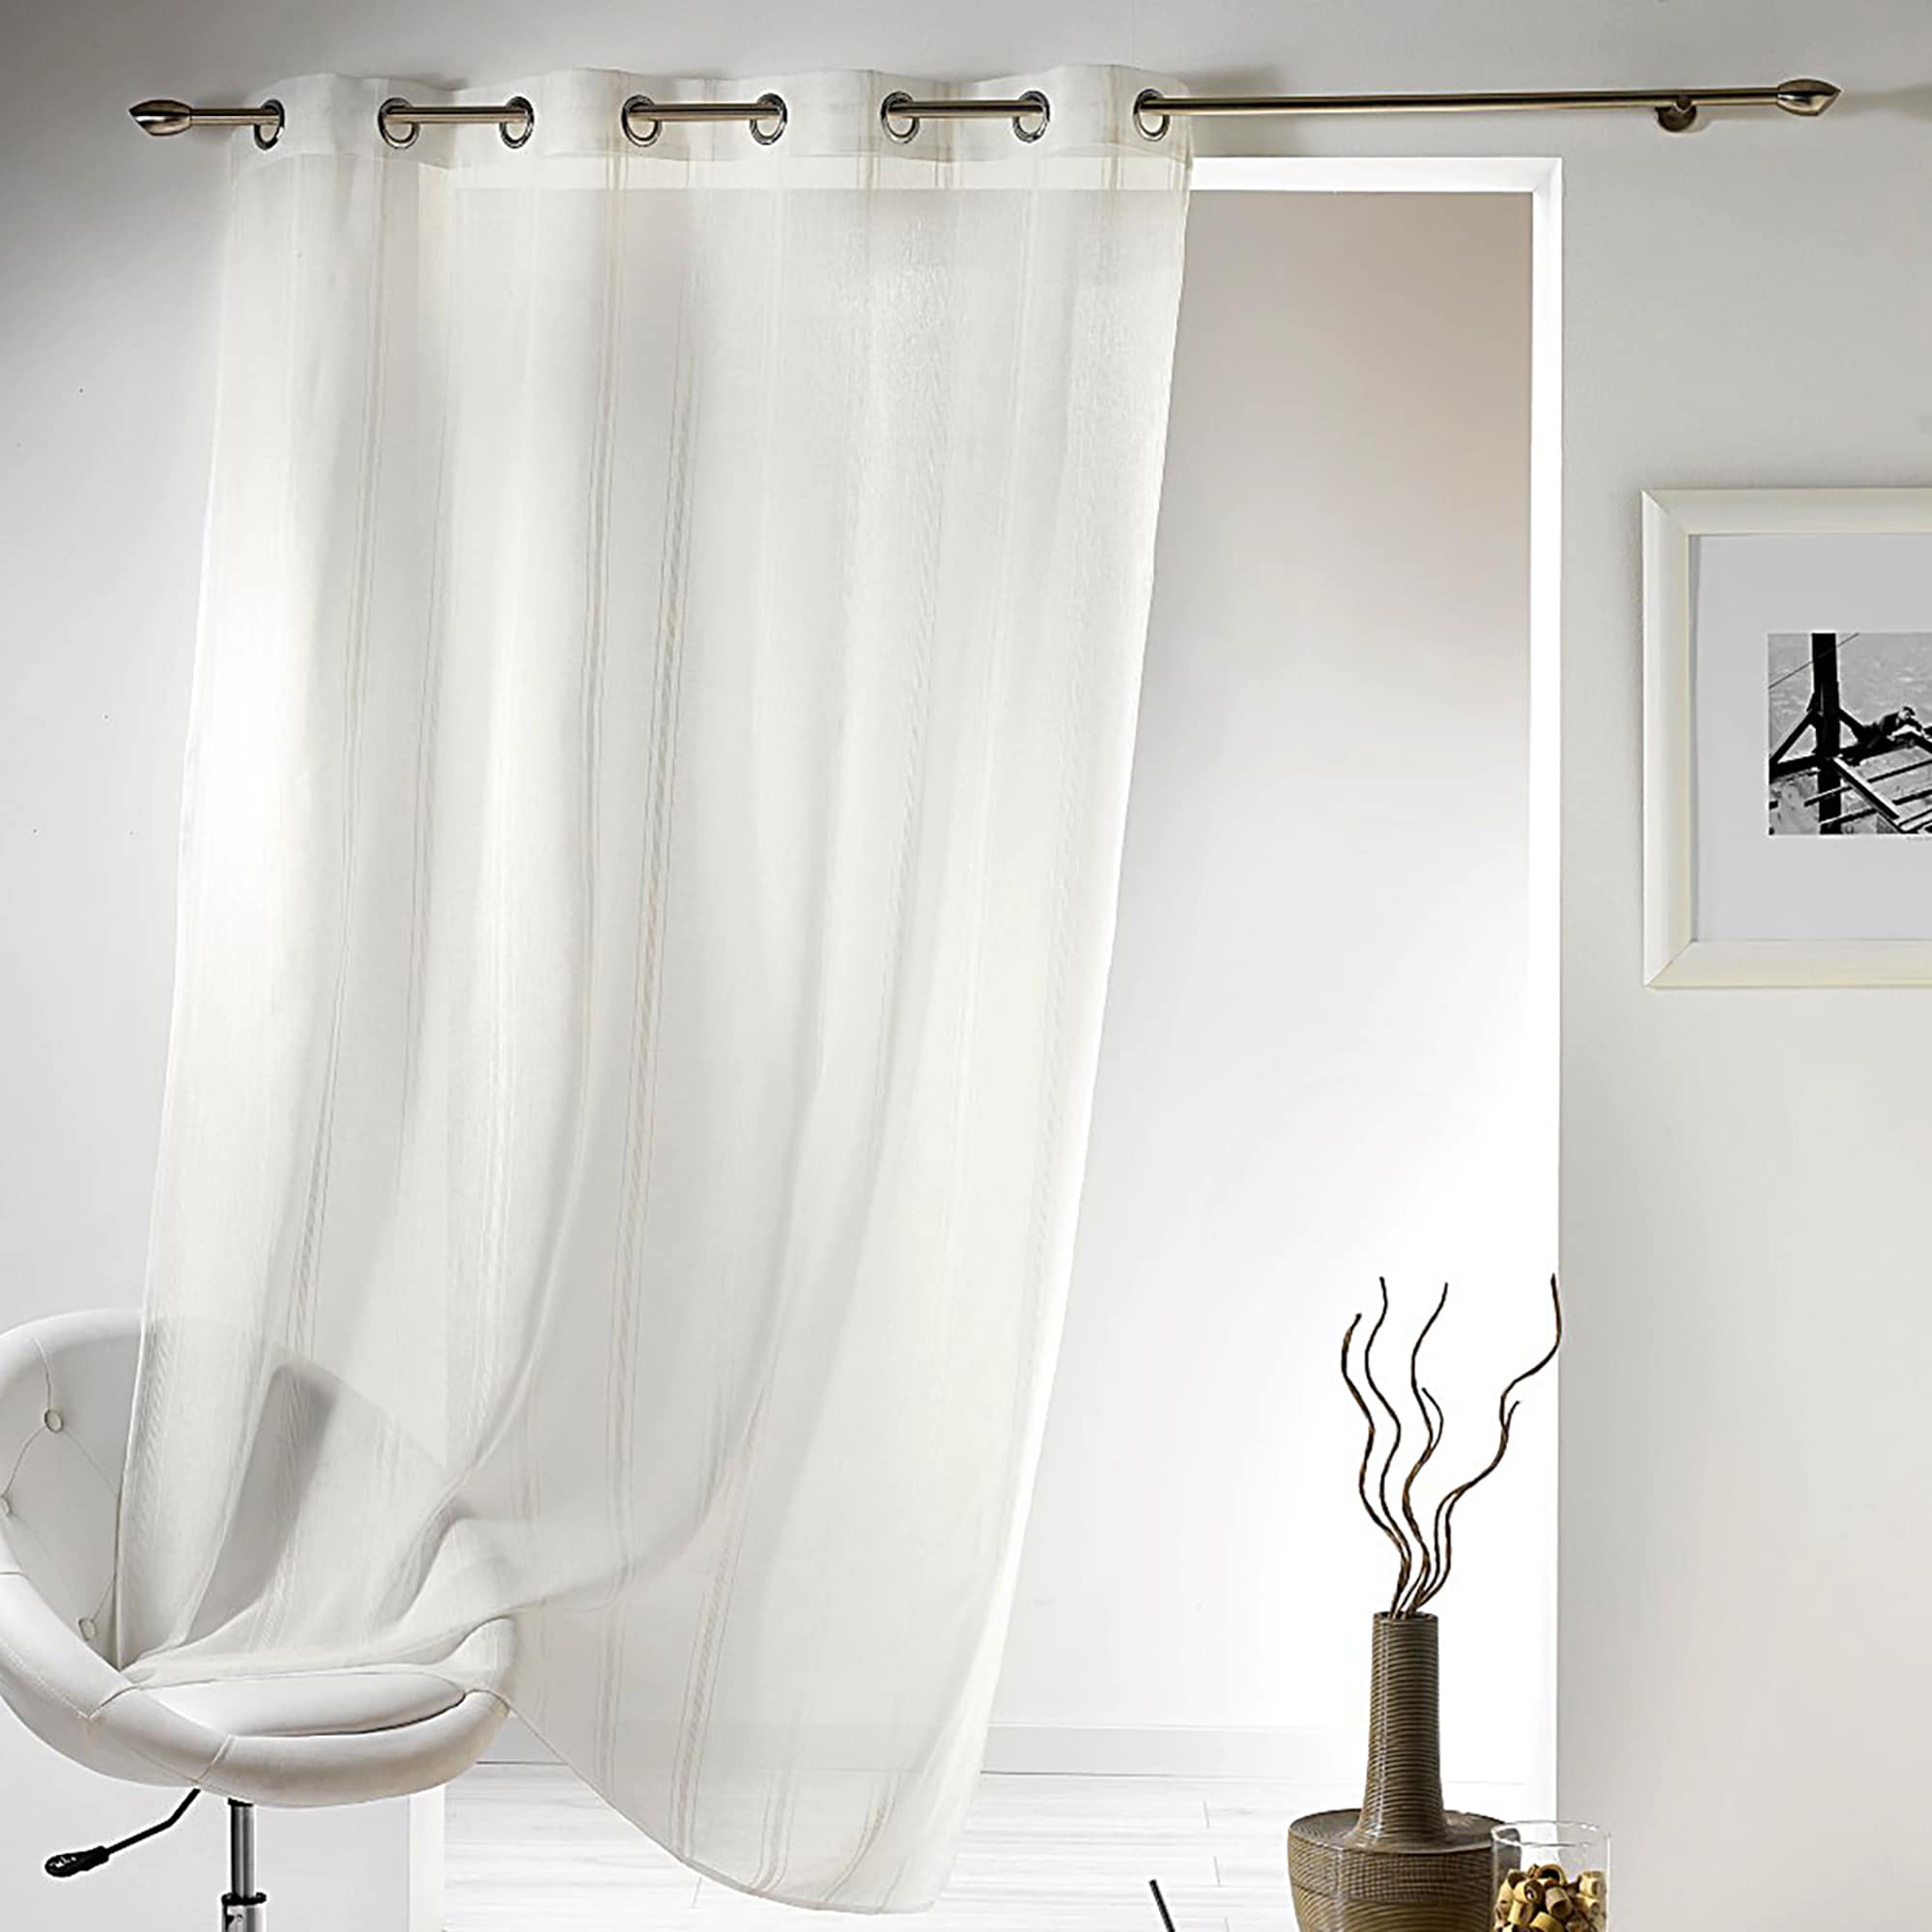 natural white with subtle stripes details sheer curtain panel 1 piece for large window